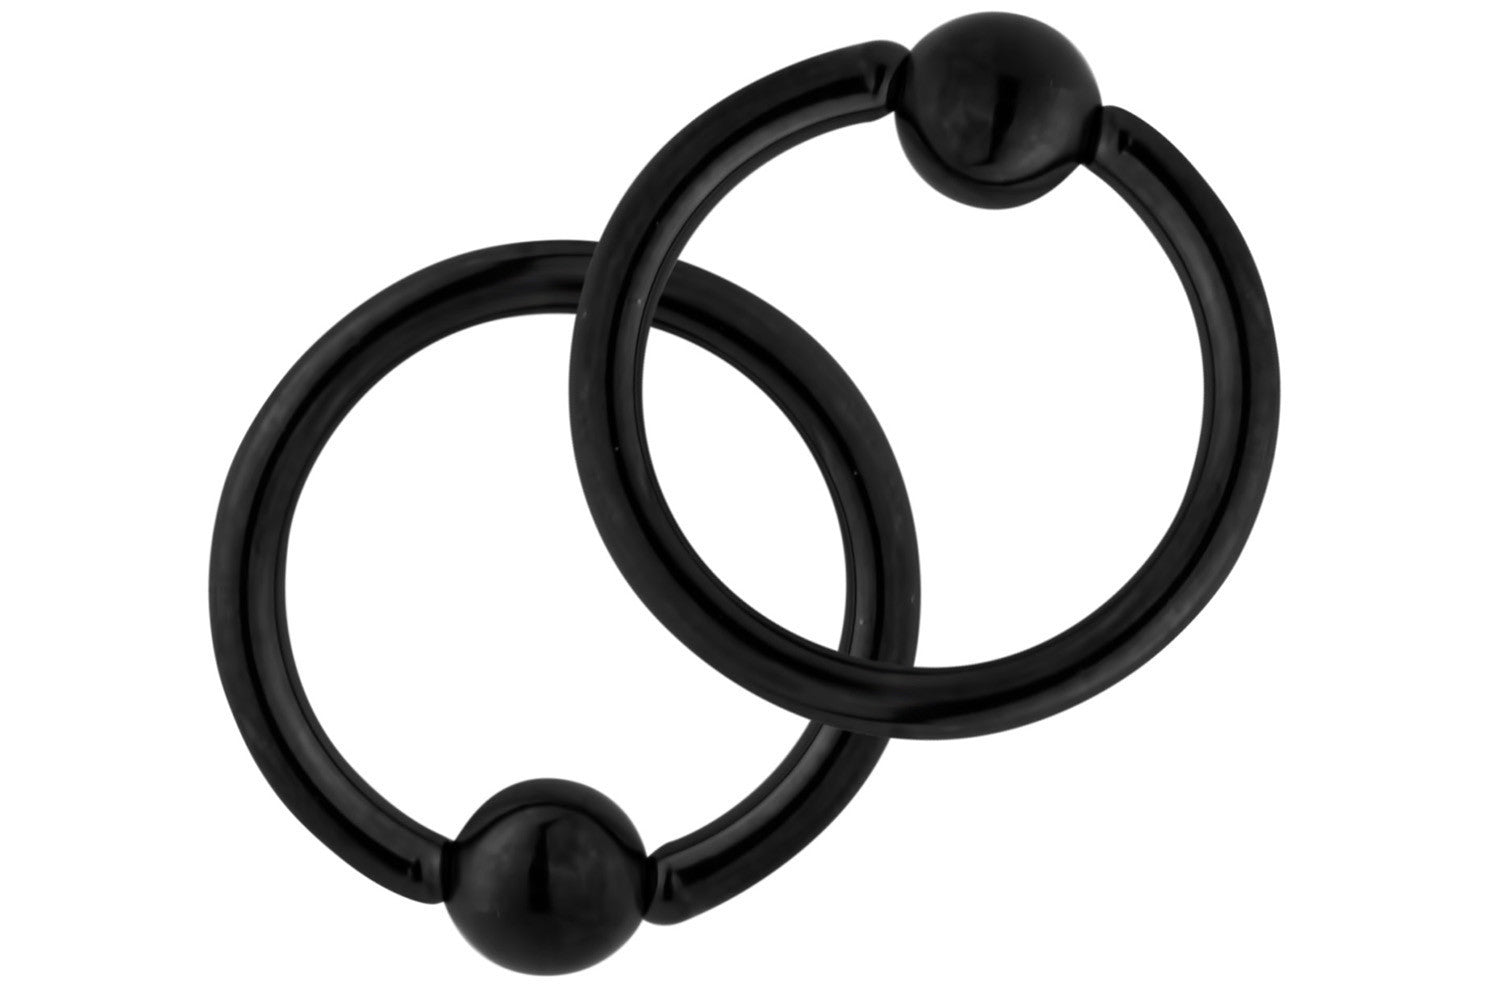 This pair of 14 gauge CBR ring is made with surgical grade 316L Stainless Steel and black Titanium IP plating. The rings are 3/8" (10 mm) in diameter with 4 mm balls.